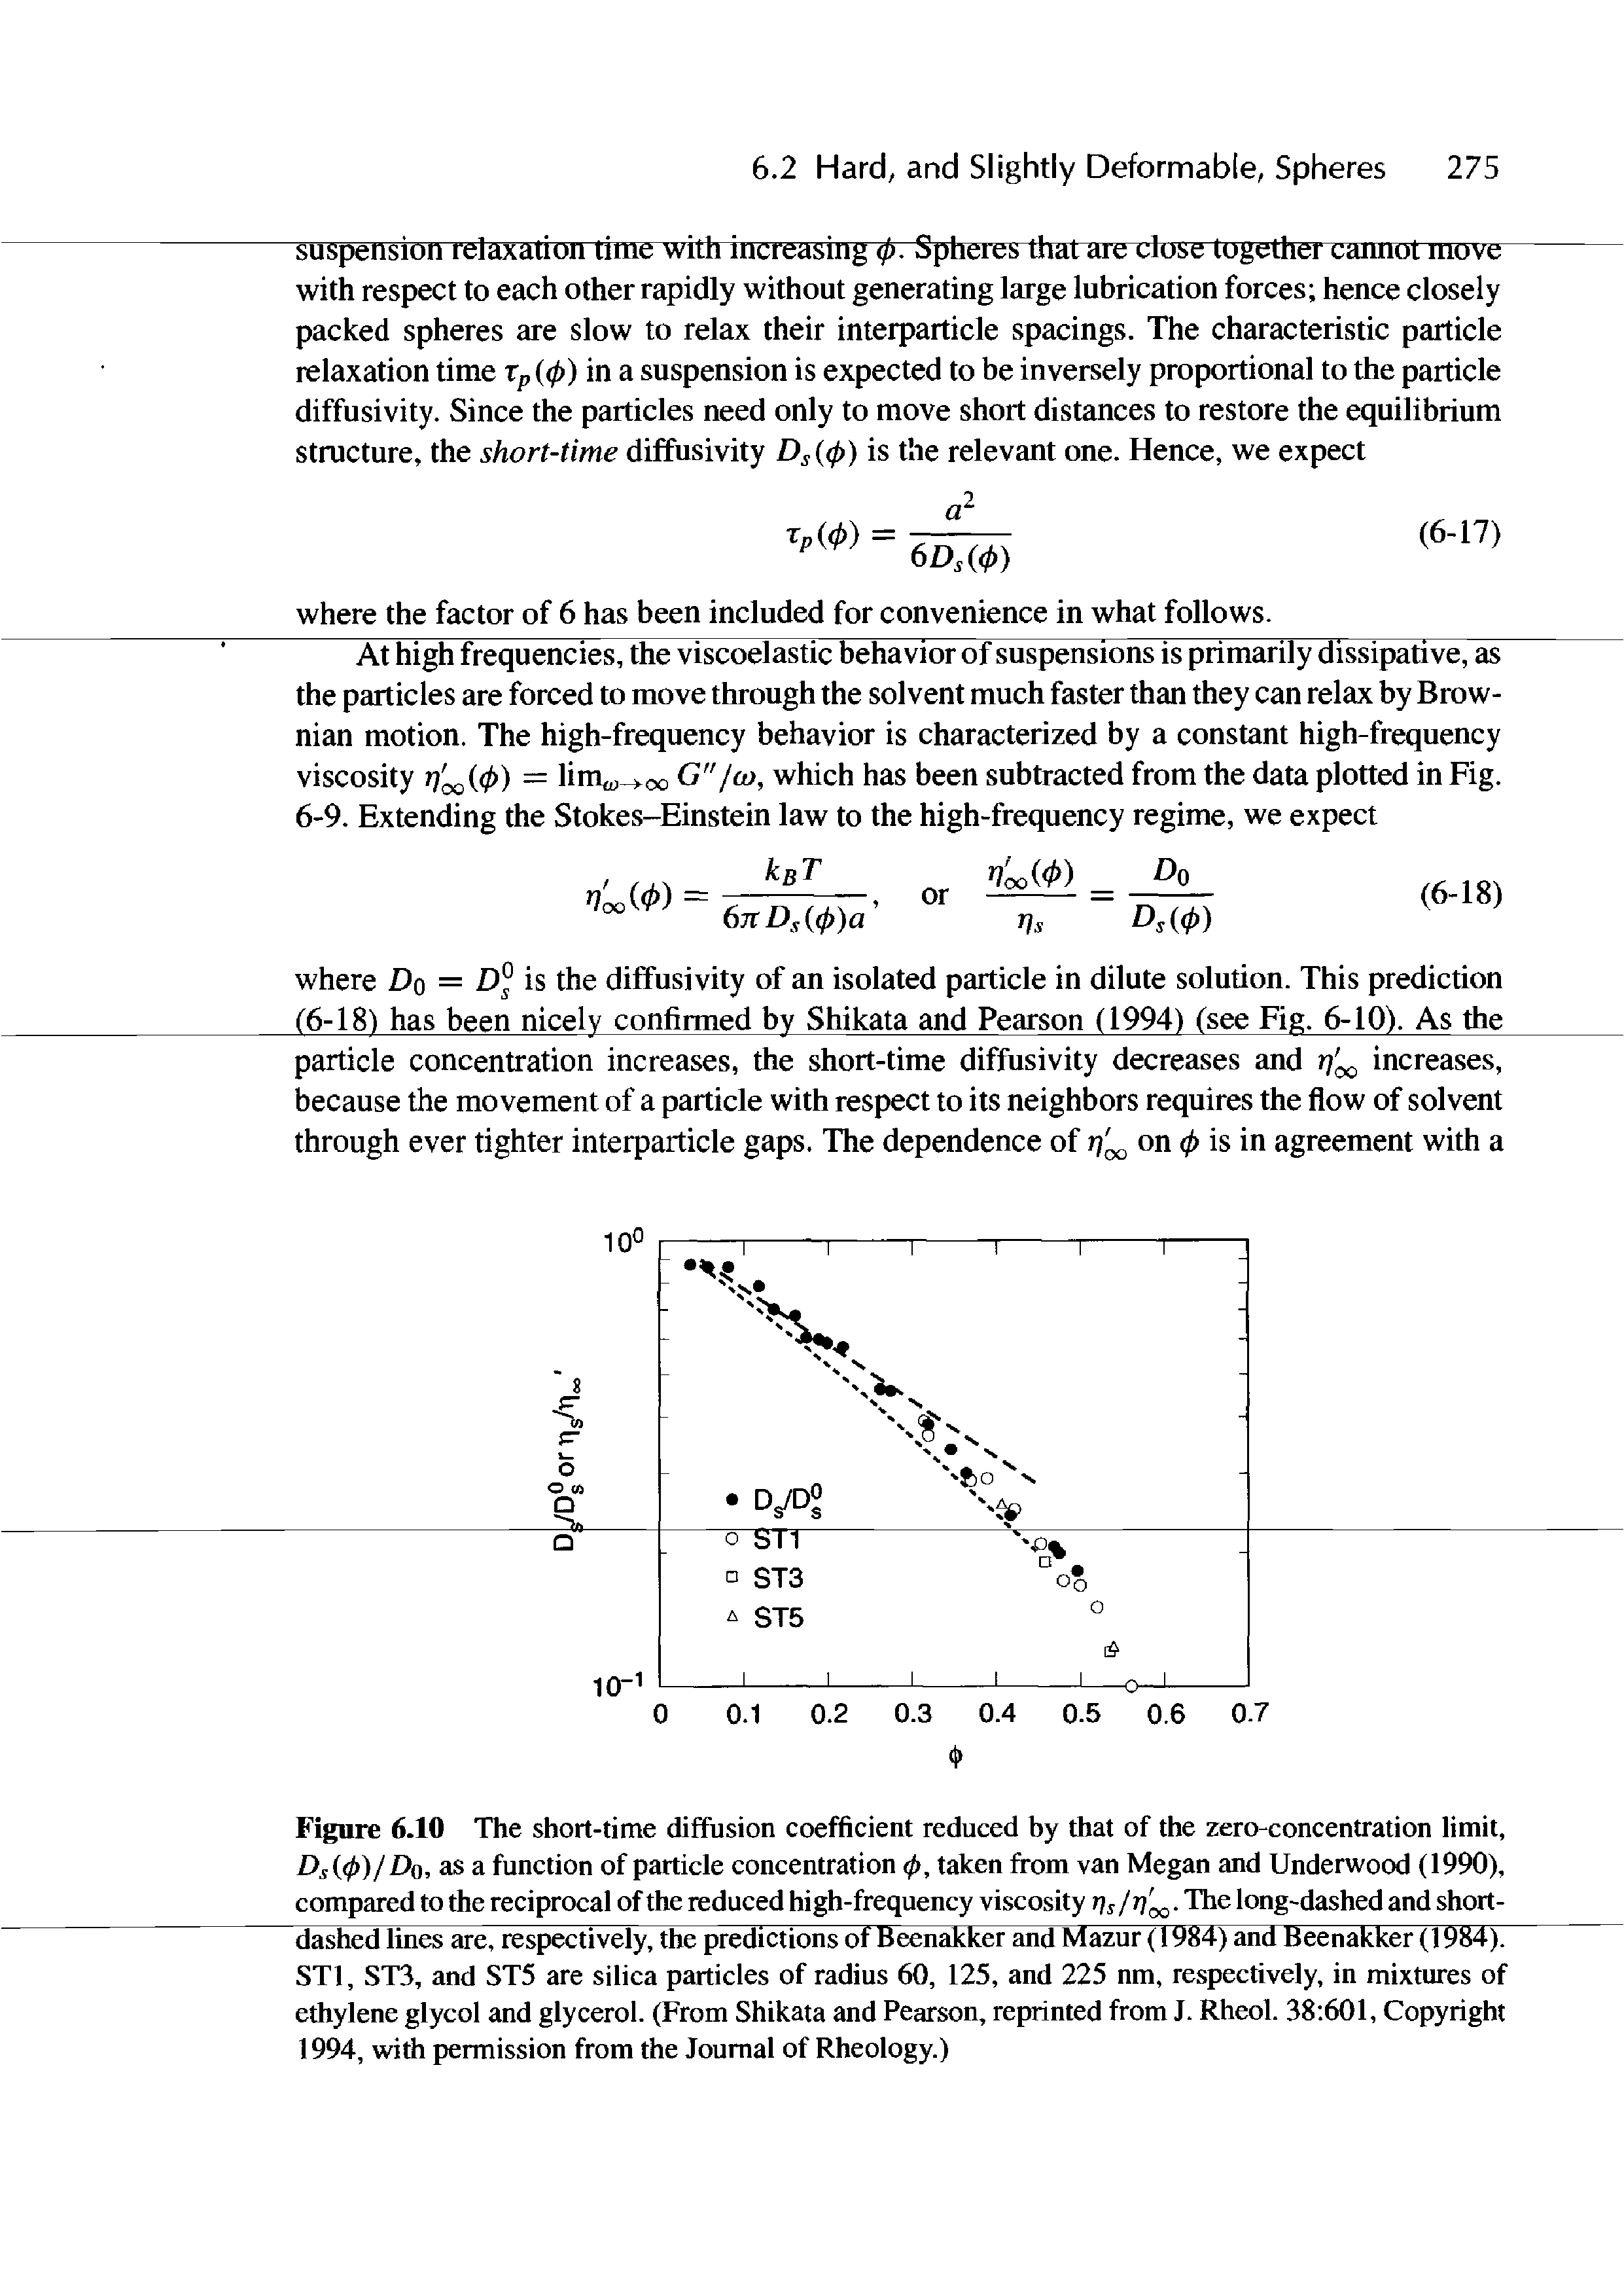 Figure 6.10 The short-time diffusion coefficient reduced by that of the zero-concentration limit, Dsi(f))/Do, as a function of particle concentration <p, taken from van Megan and Underwood (1990), compared to the reciprocal of the reduced high-frequency viscosity The long-dashed and short-...